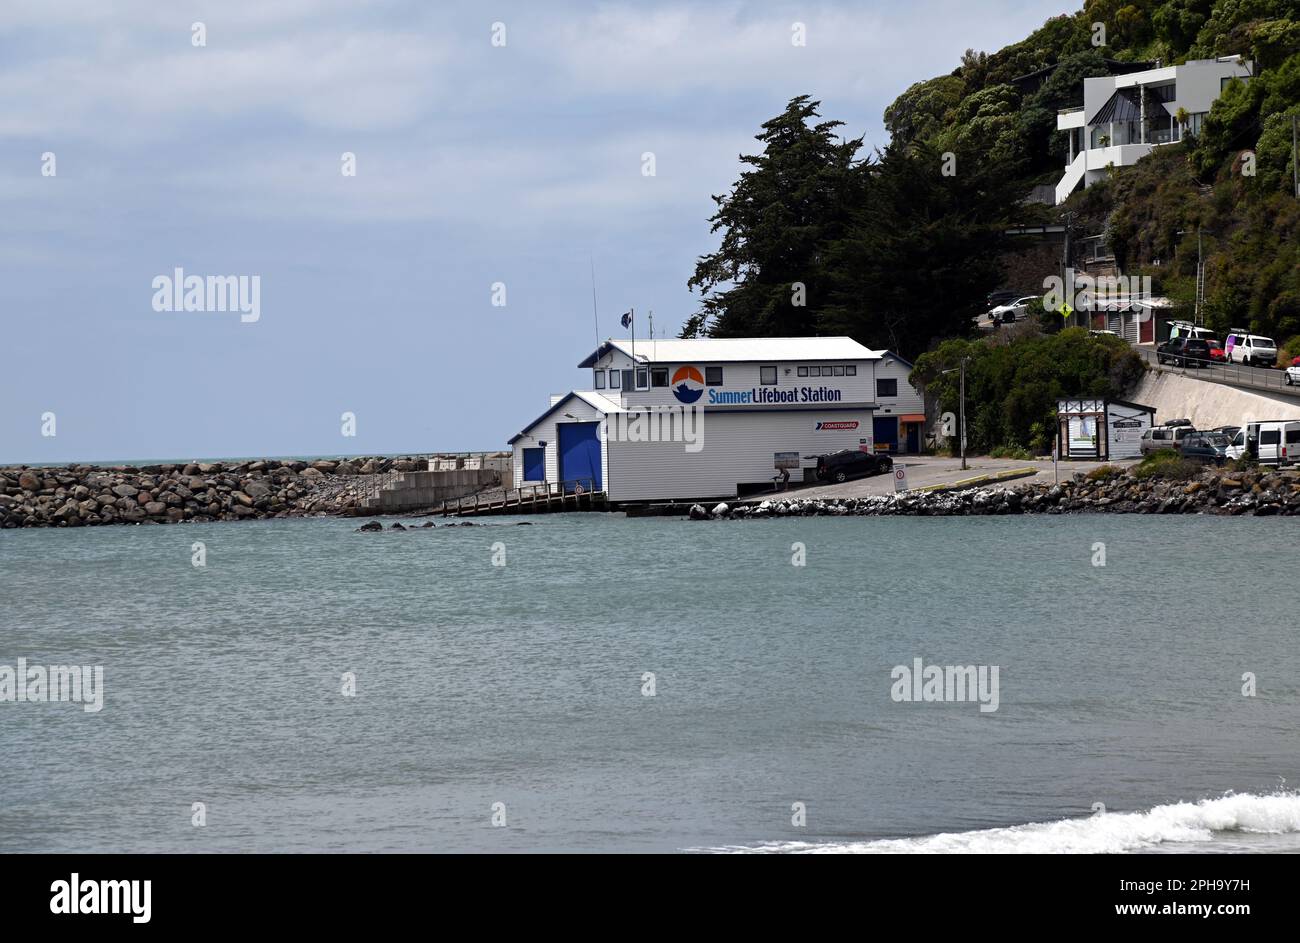 The Sunmer lifeboat station stands at the far end of the beach, away from the town itself. It has recently changed its name to Coastguard Sumner. Stock Photo